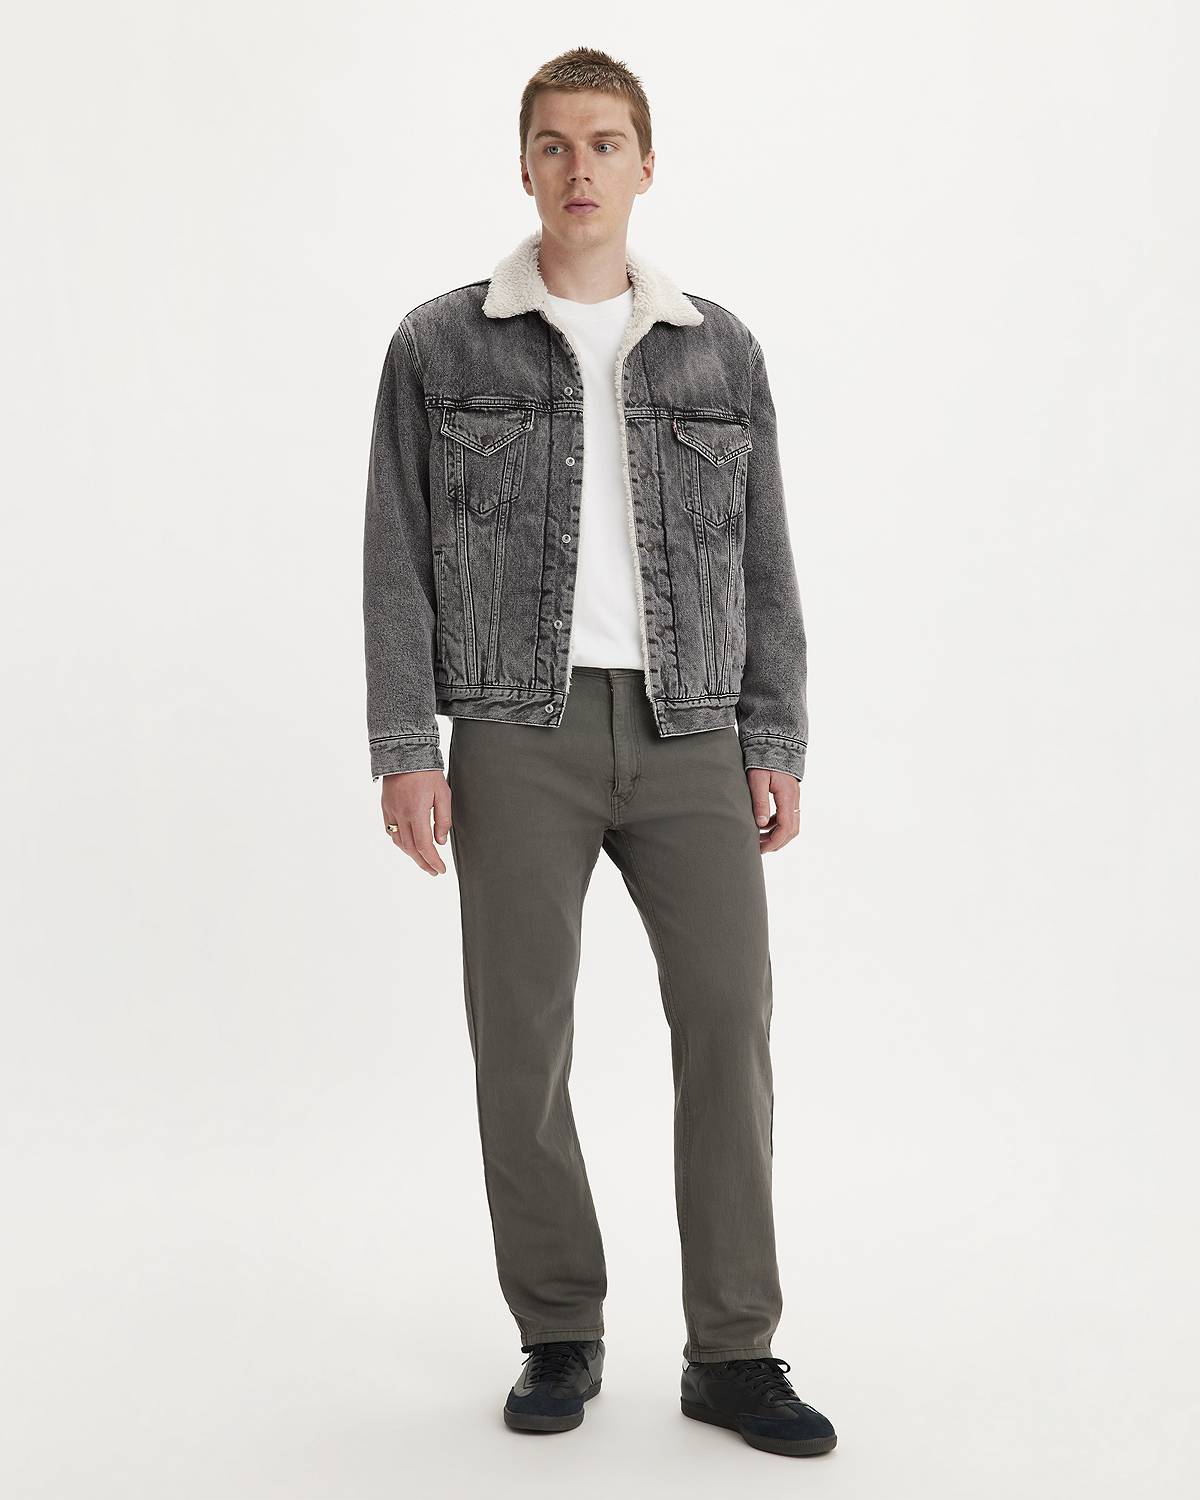 Model wearing dark wash pants with a trucker jacket of the same color and white top under.